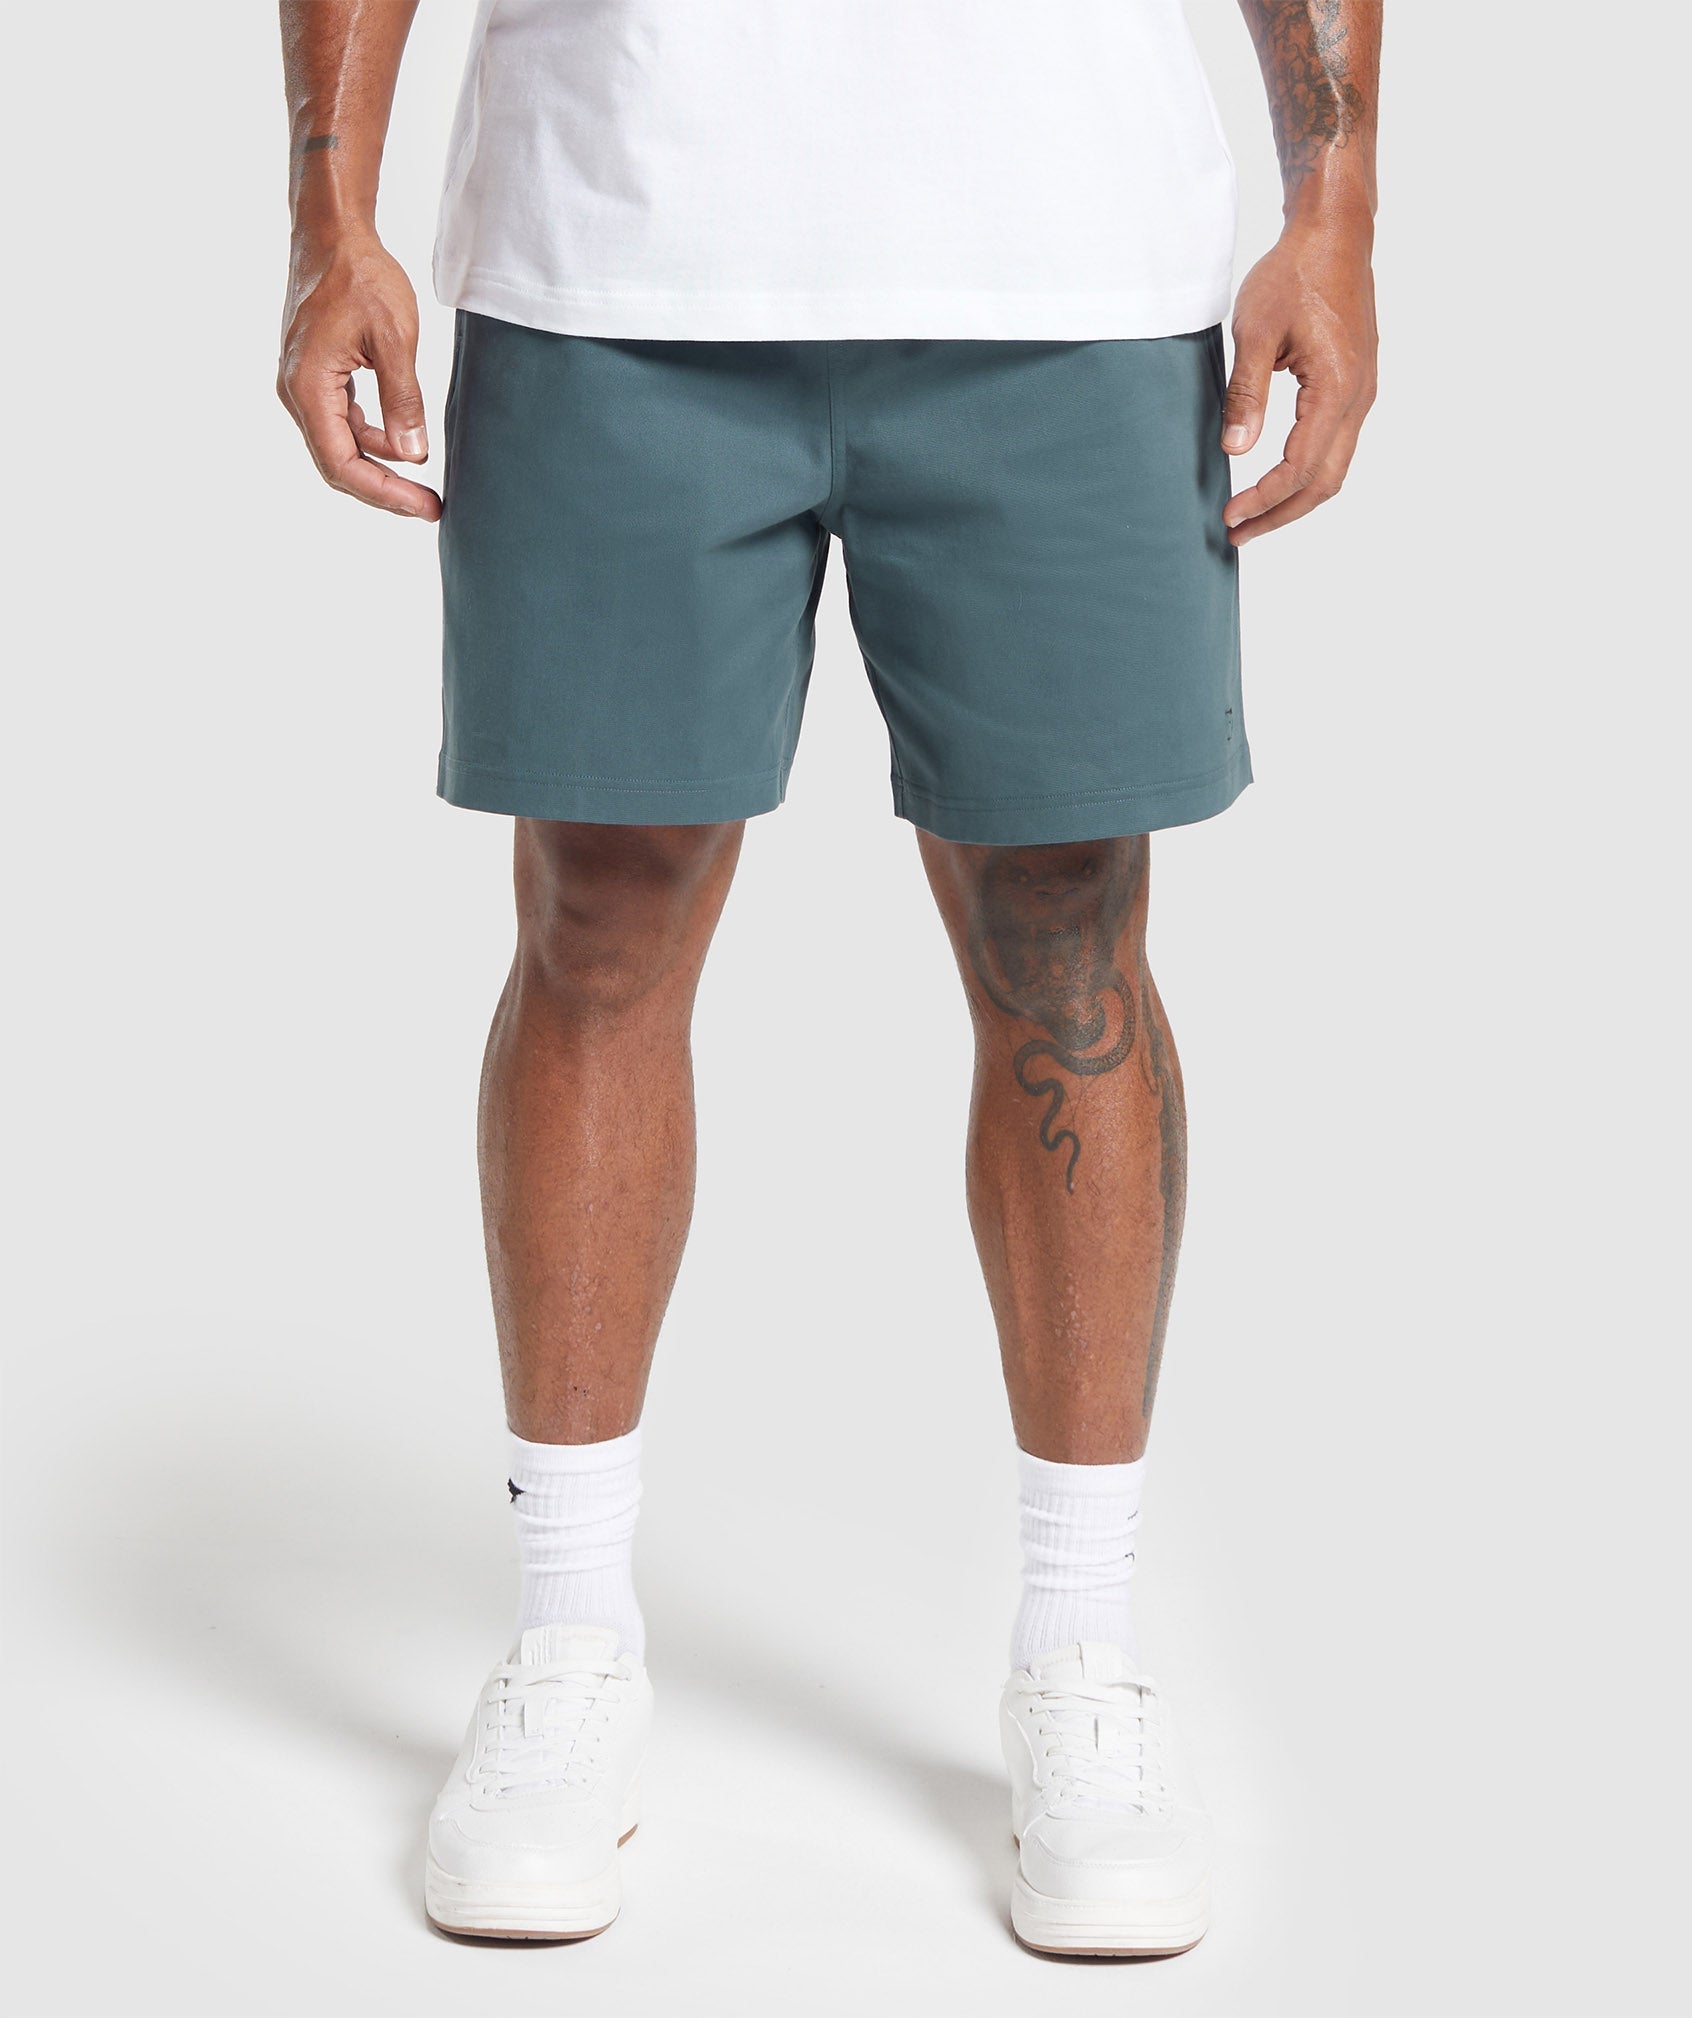 Rest Day Woven Shorts in Smokey Teal - view 1